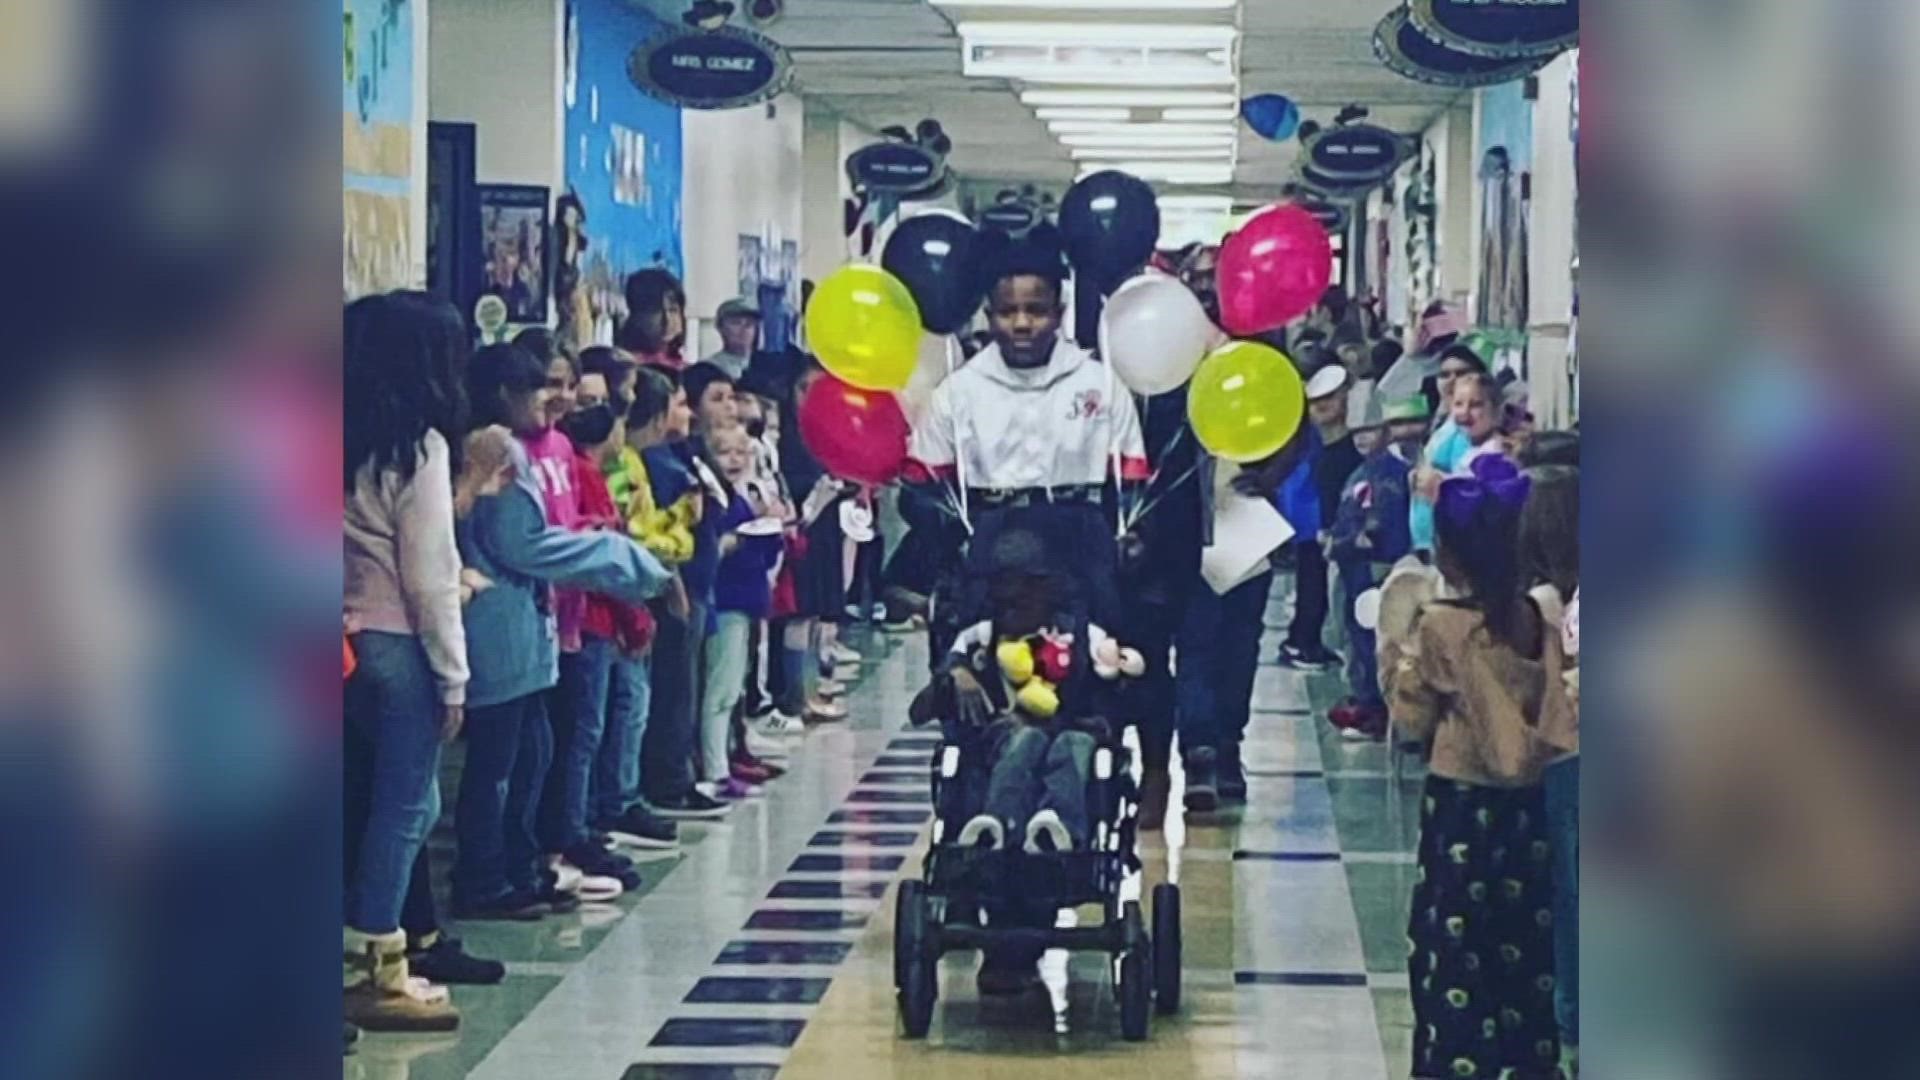 Calvin's teachers and classmates say he's a friendly and kind boy who loves Mickey Mouse, so getting to send him to Disney World was a dream come true.